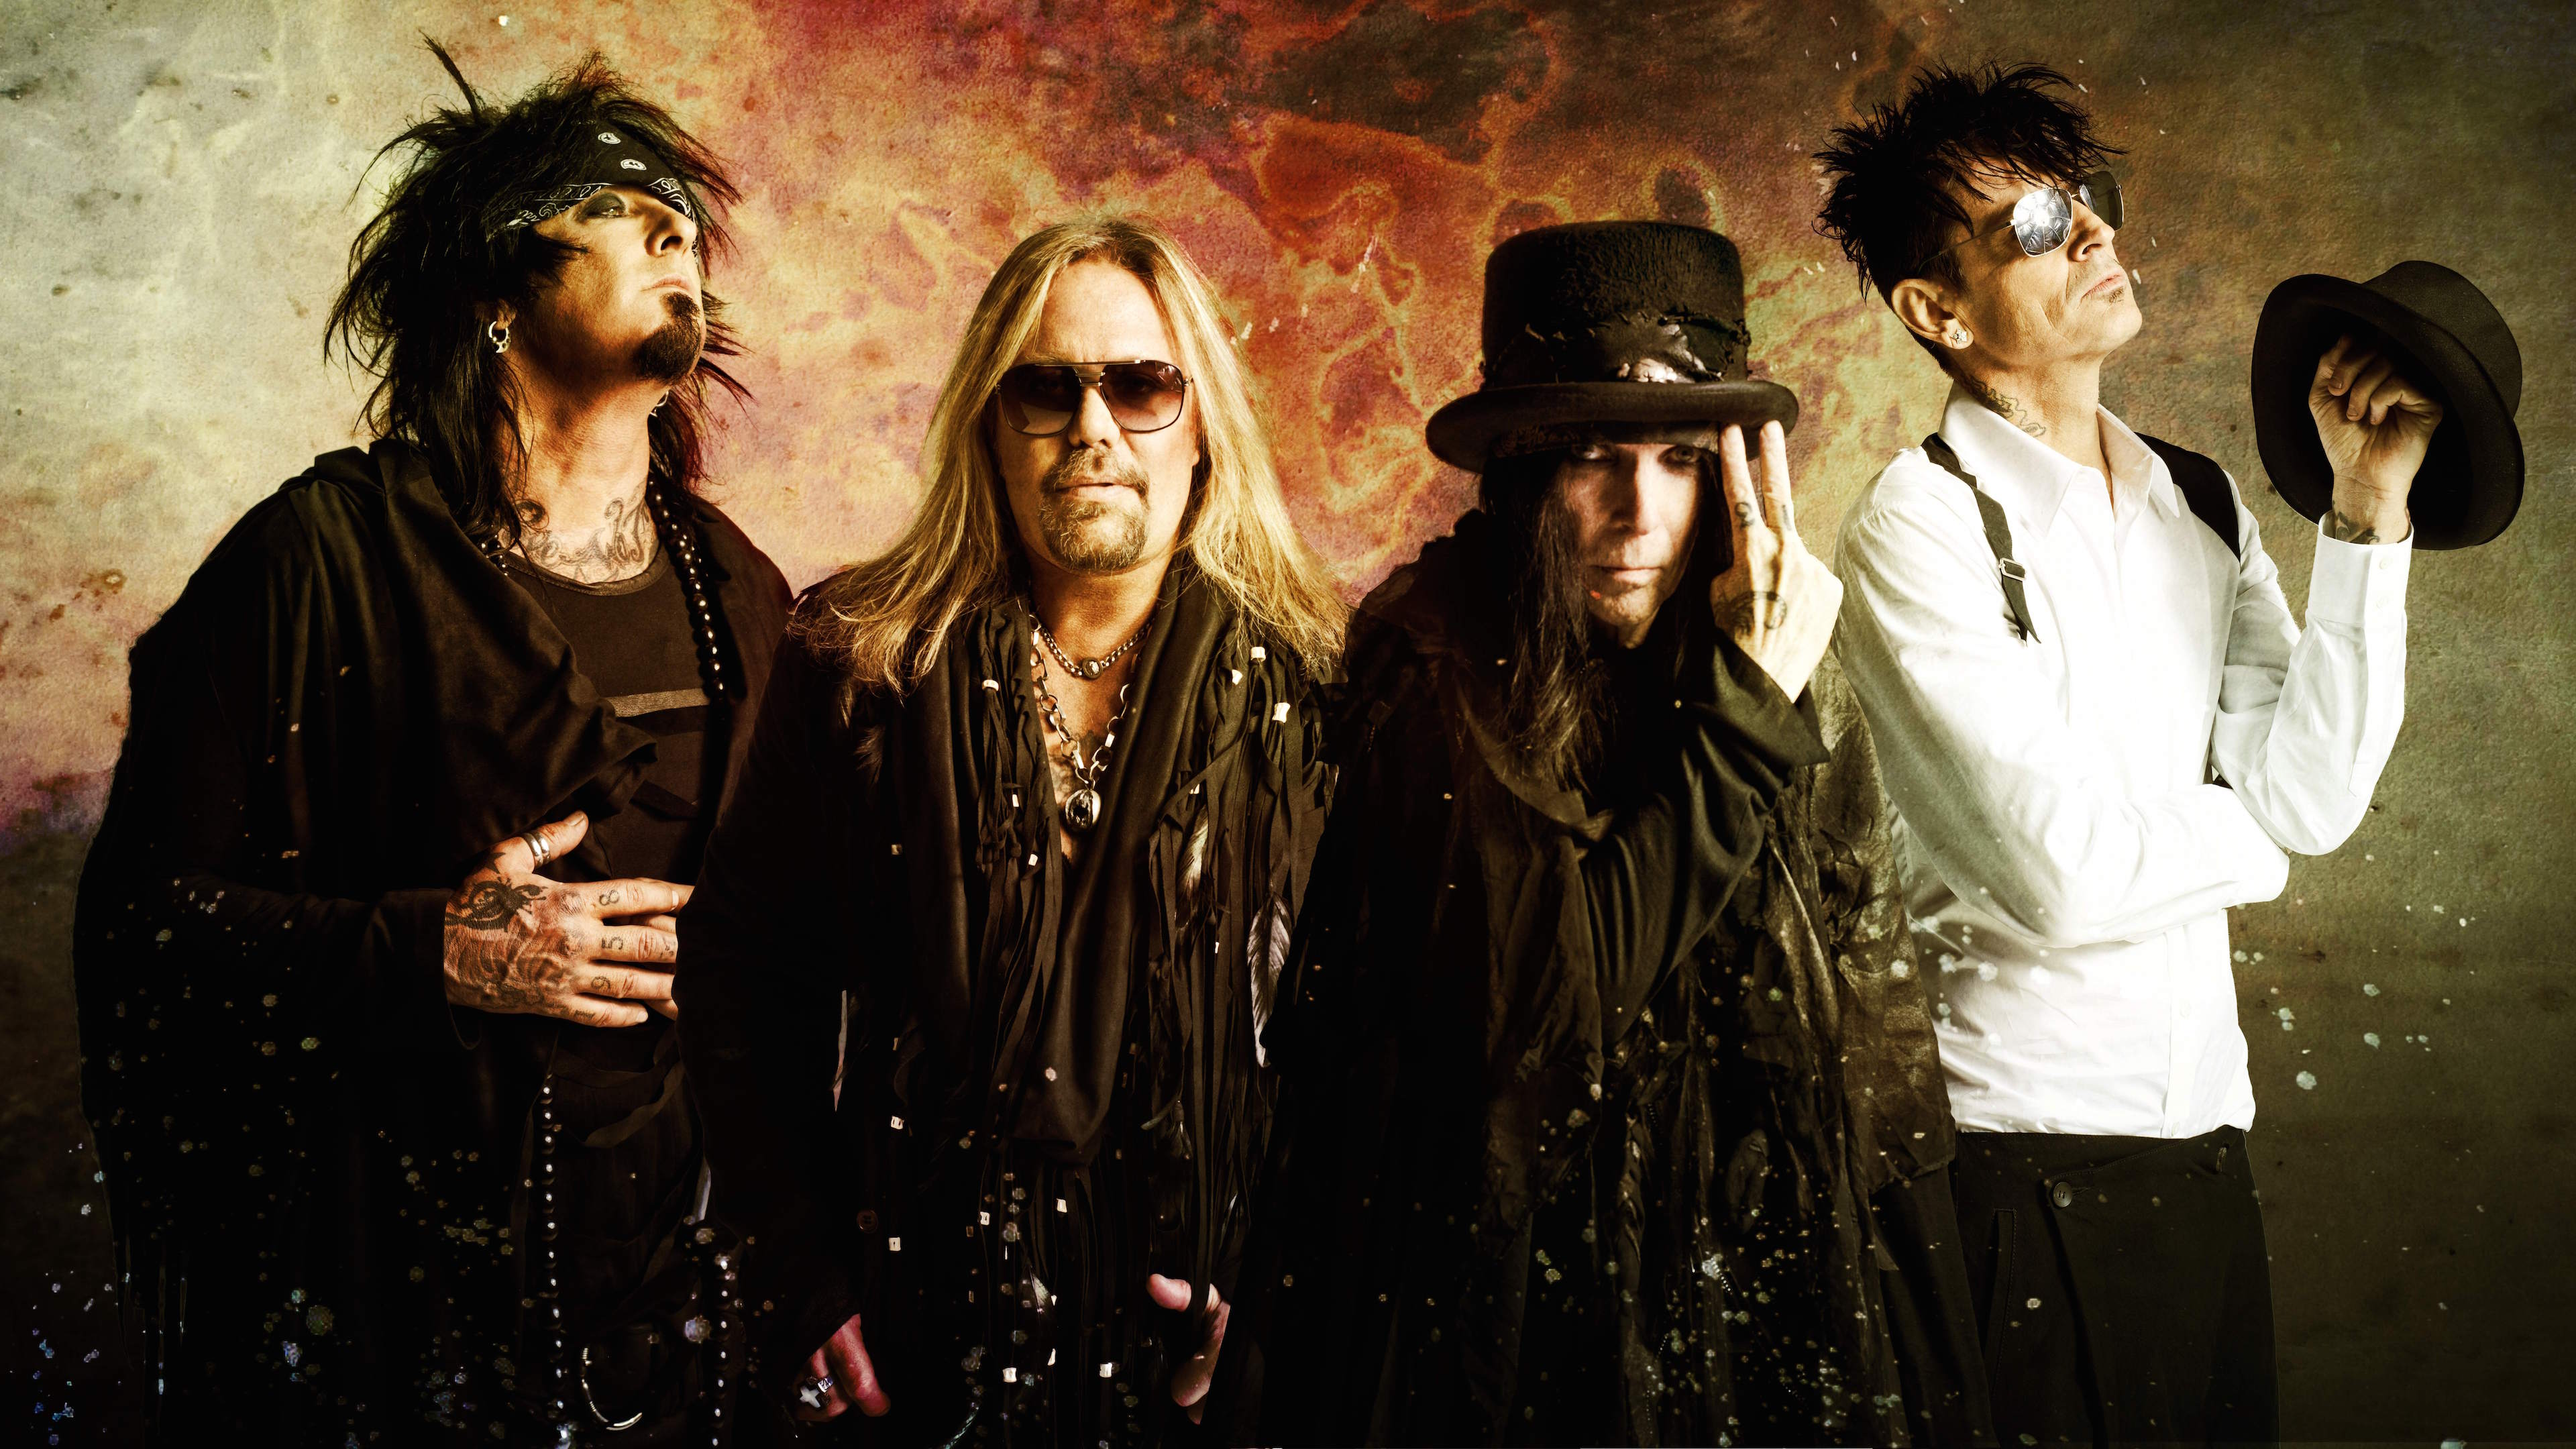 Motley Crue Hd Wallpapers 7wallpapers Net - Share the best gifs now. 